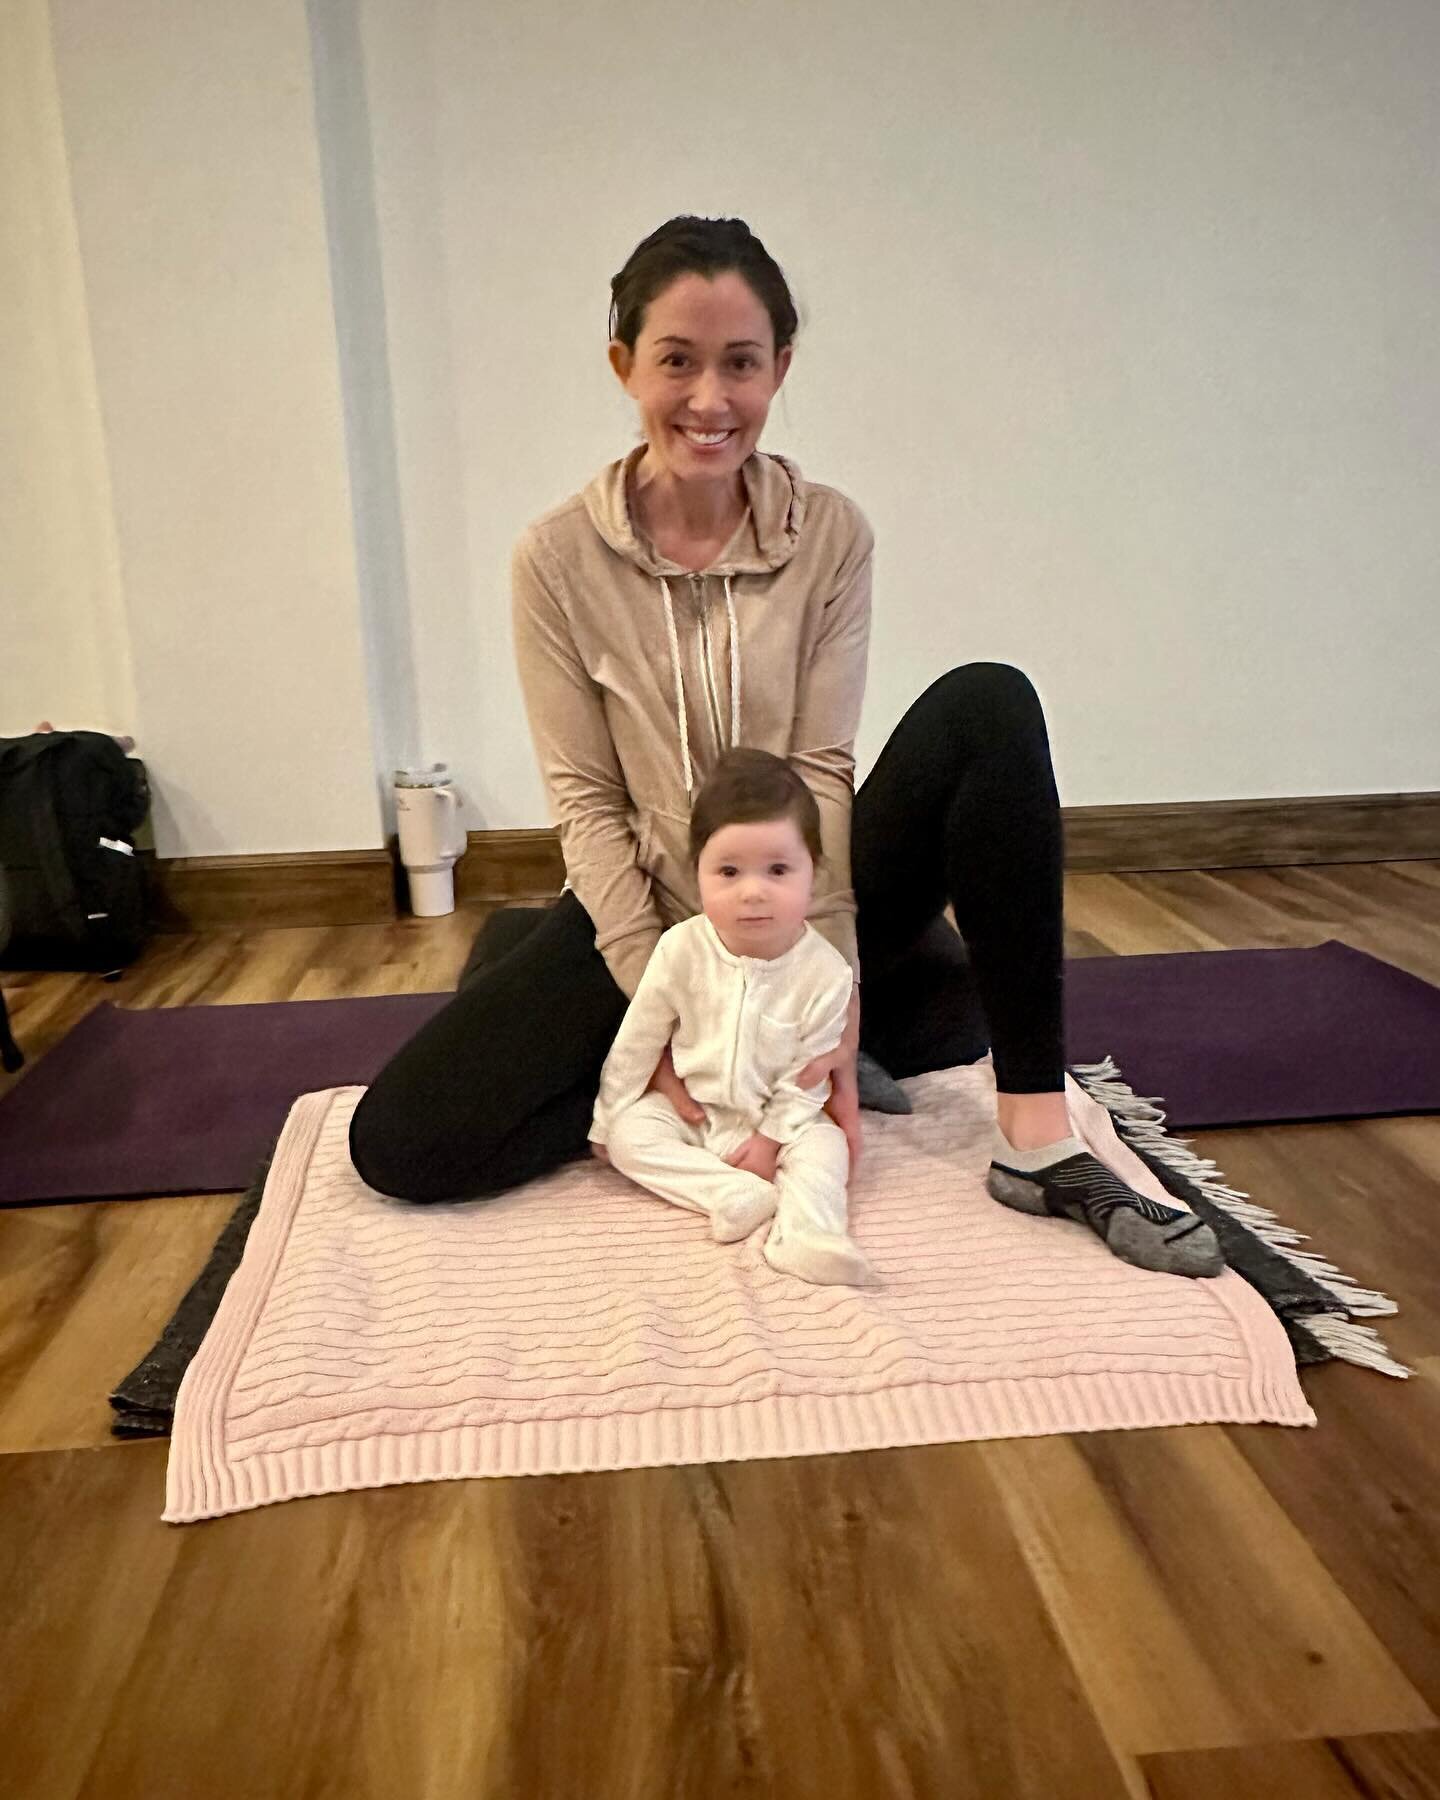 BYOBaby Yoga Tomorrow 10:45-11:45am @nurturenashvilleyoga 
What&rsquo;s the best part of a &ldquo;baby led class&rdquo;? 
There&rsquo;s zero pressure! (For you &amp; for your lil one 🥰). 

*You&rsquo;re never late even if the class has already start